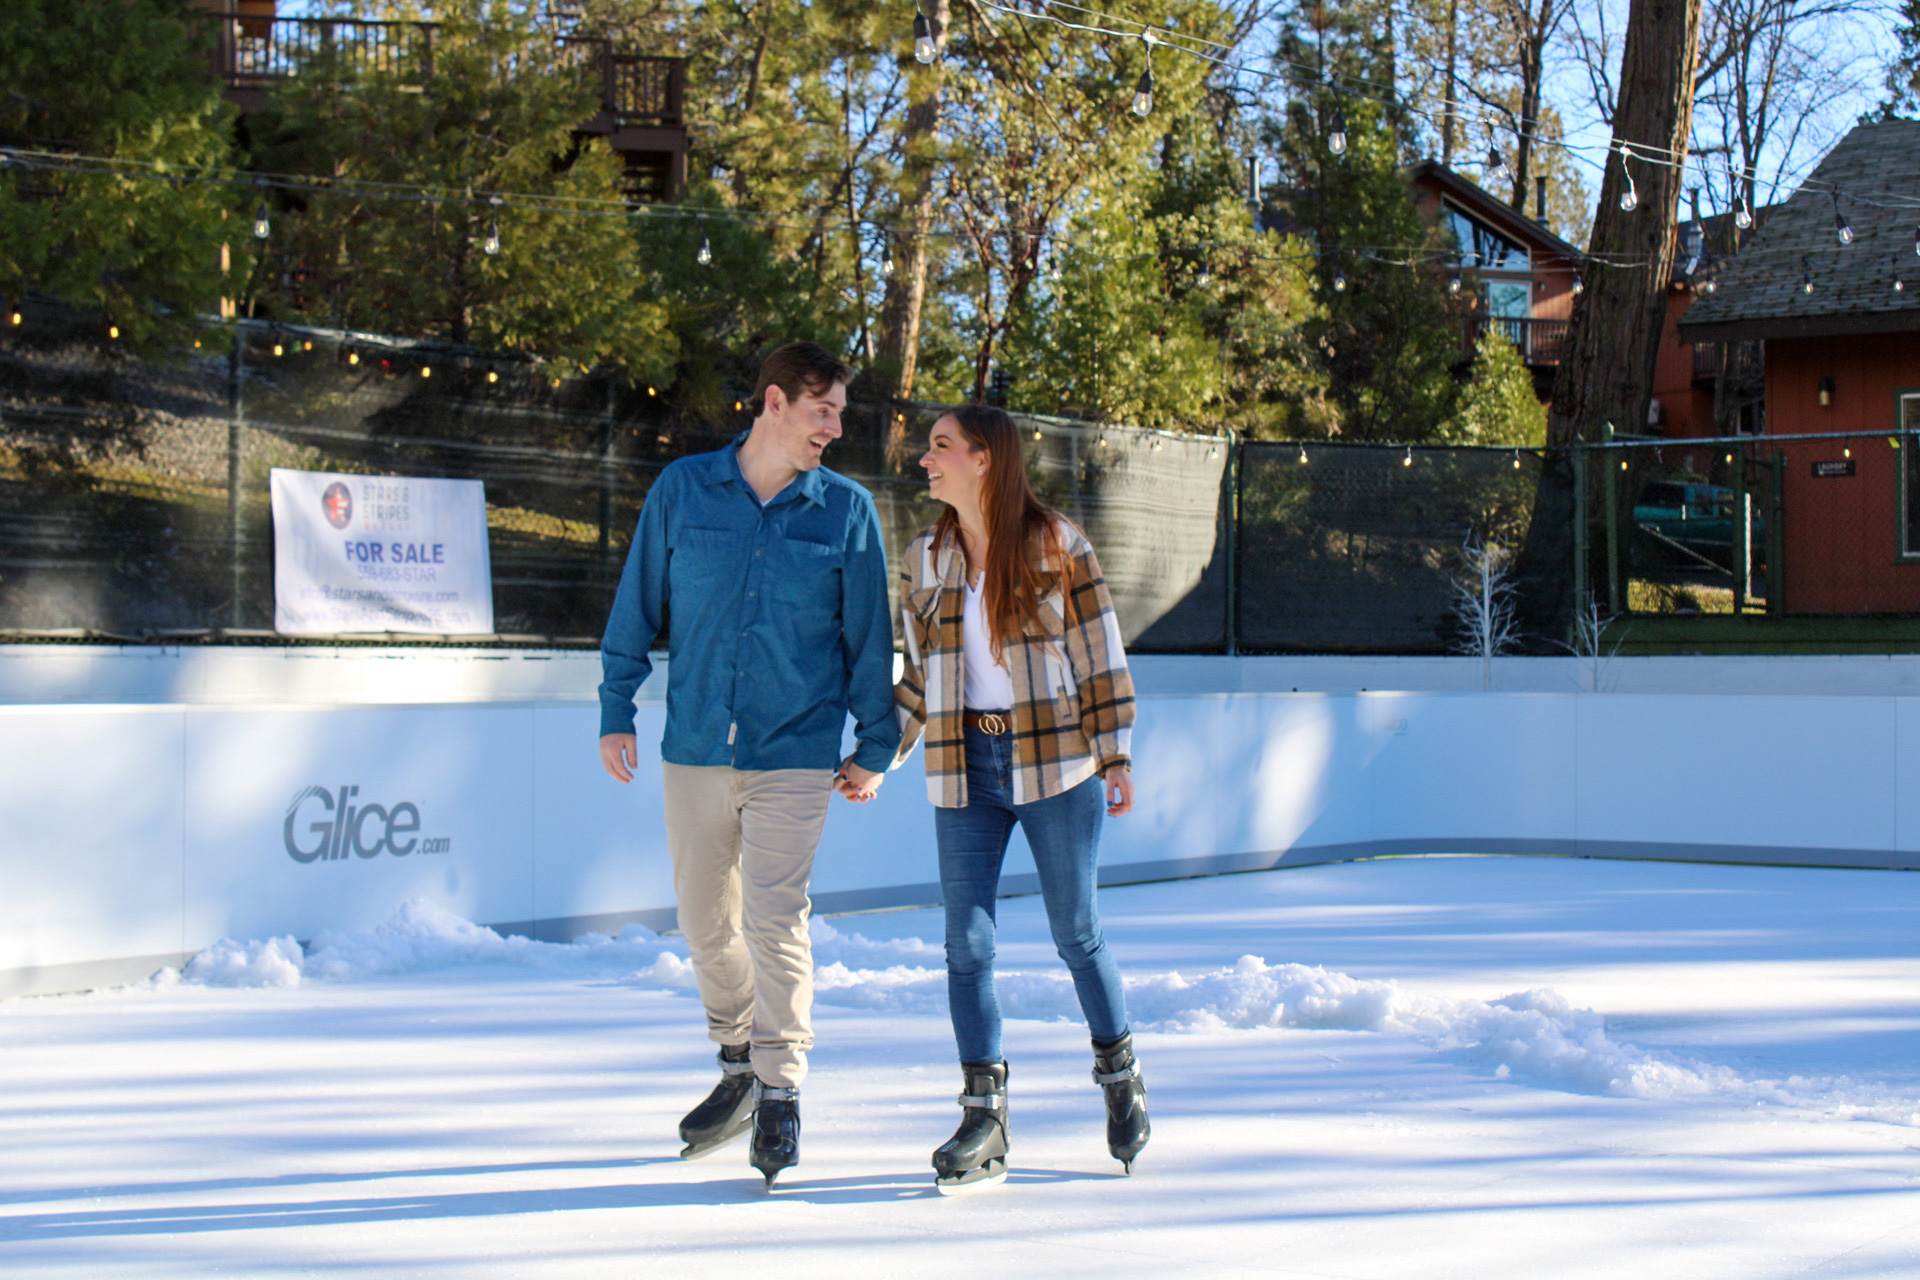 Ice Skating All Year Round? The Pines Resort Makes it Possible with Glice Synthetic Ice! 